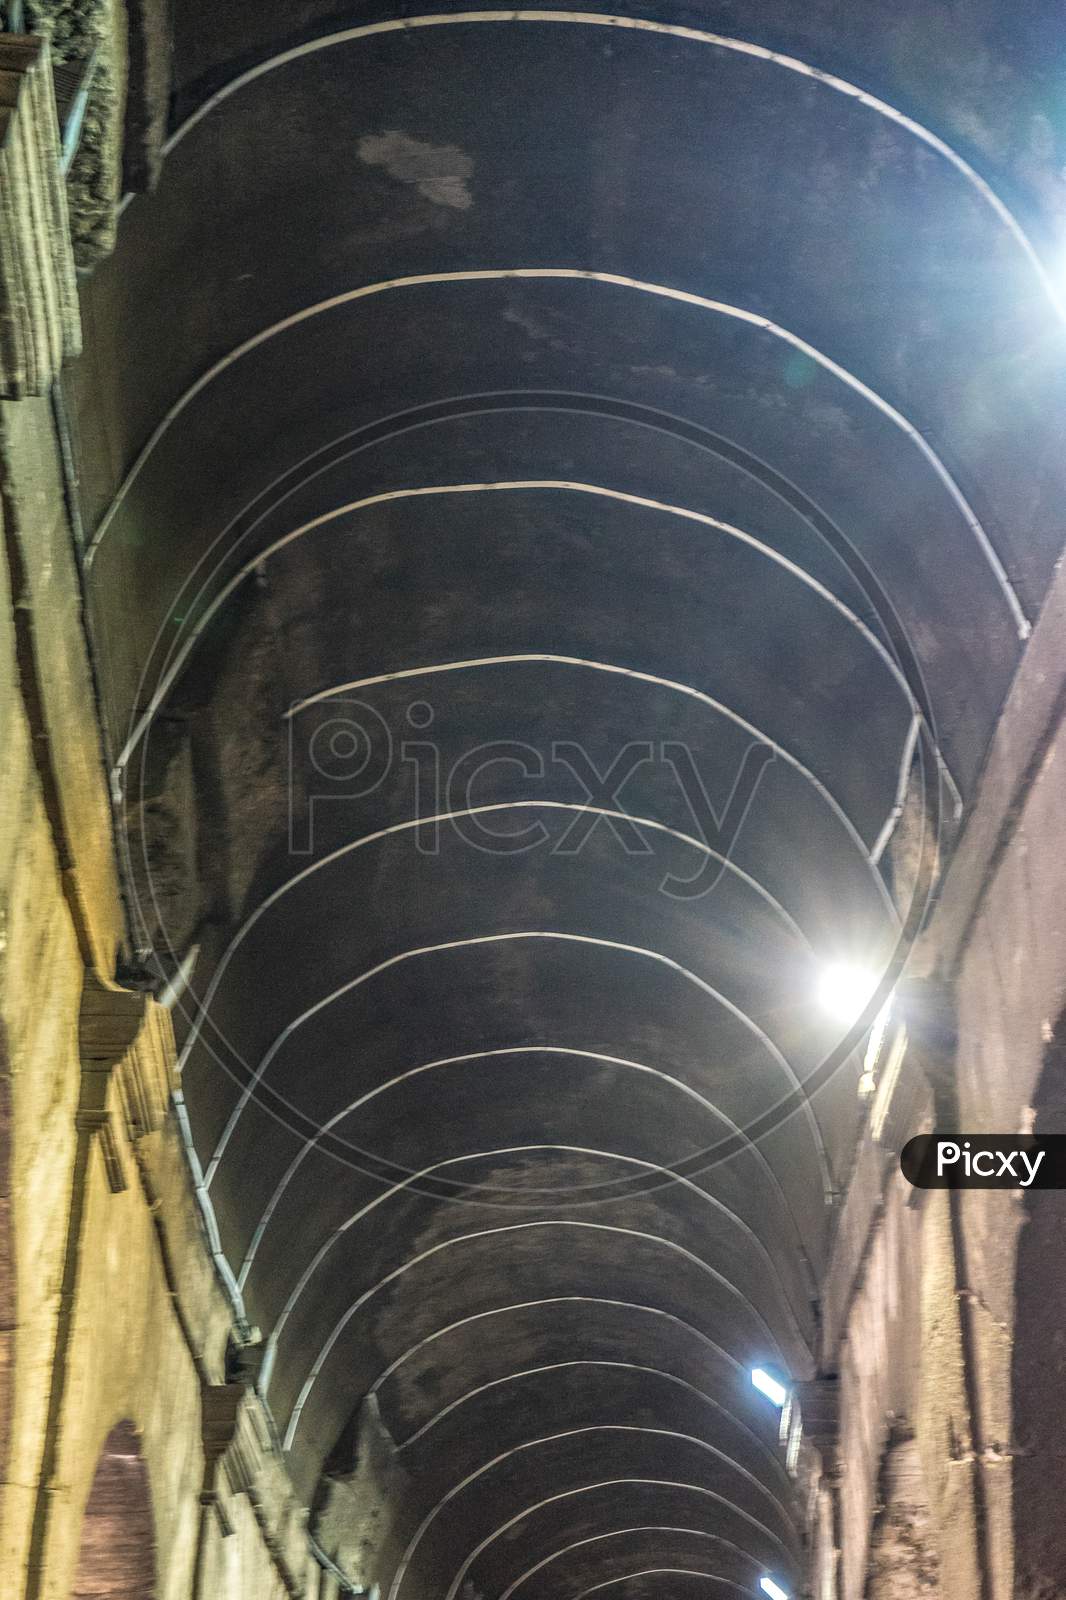 Rome, Italy - 23 June 2018: The Ceiling Of The Passage At The Entrance Of The Roman Colosseum (Coliseum, Colosseo), Also Known As The Flavian Amphitheatre. Famous World Landmark. Scenic Urban Landscape.